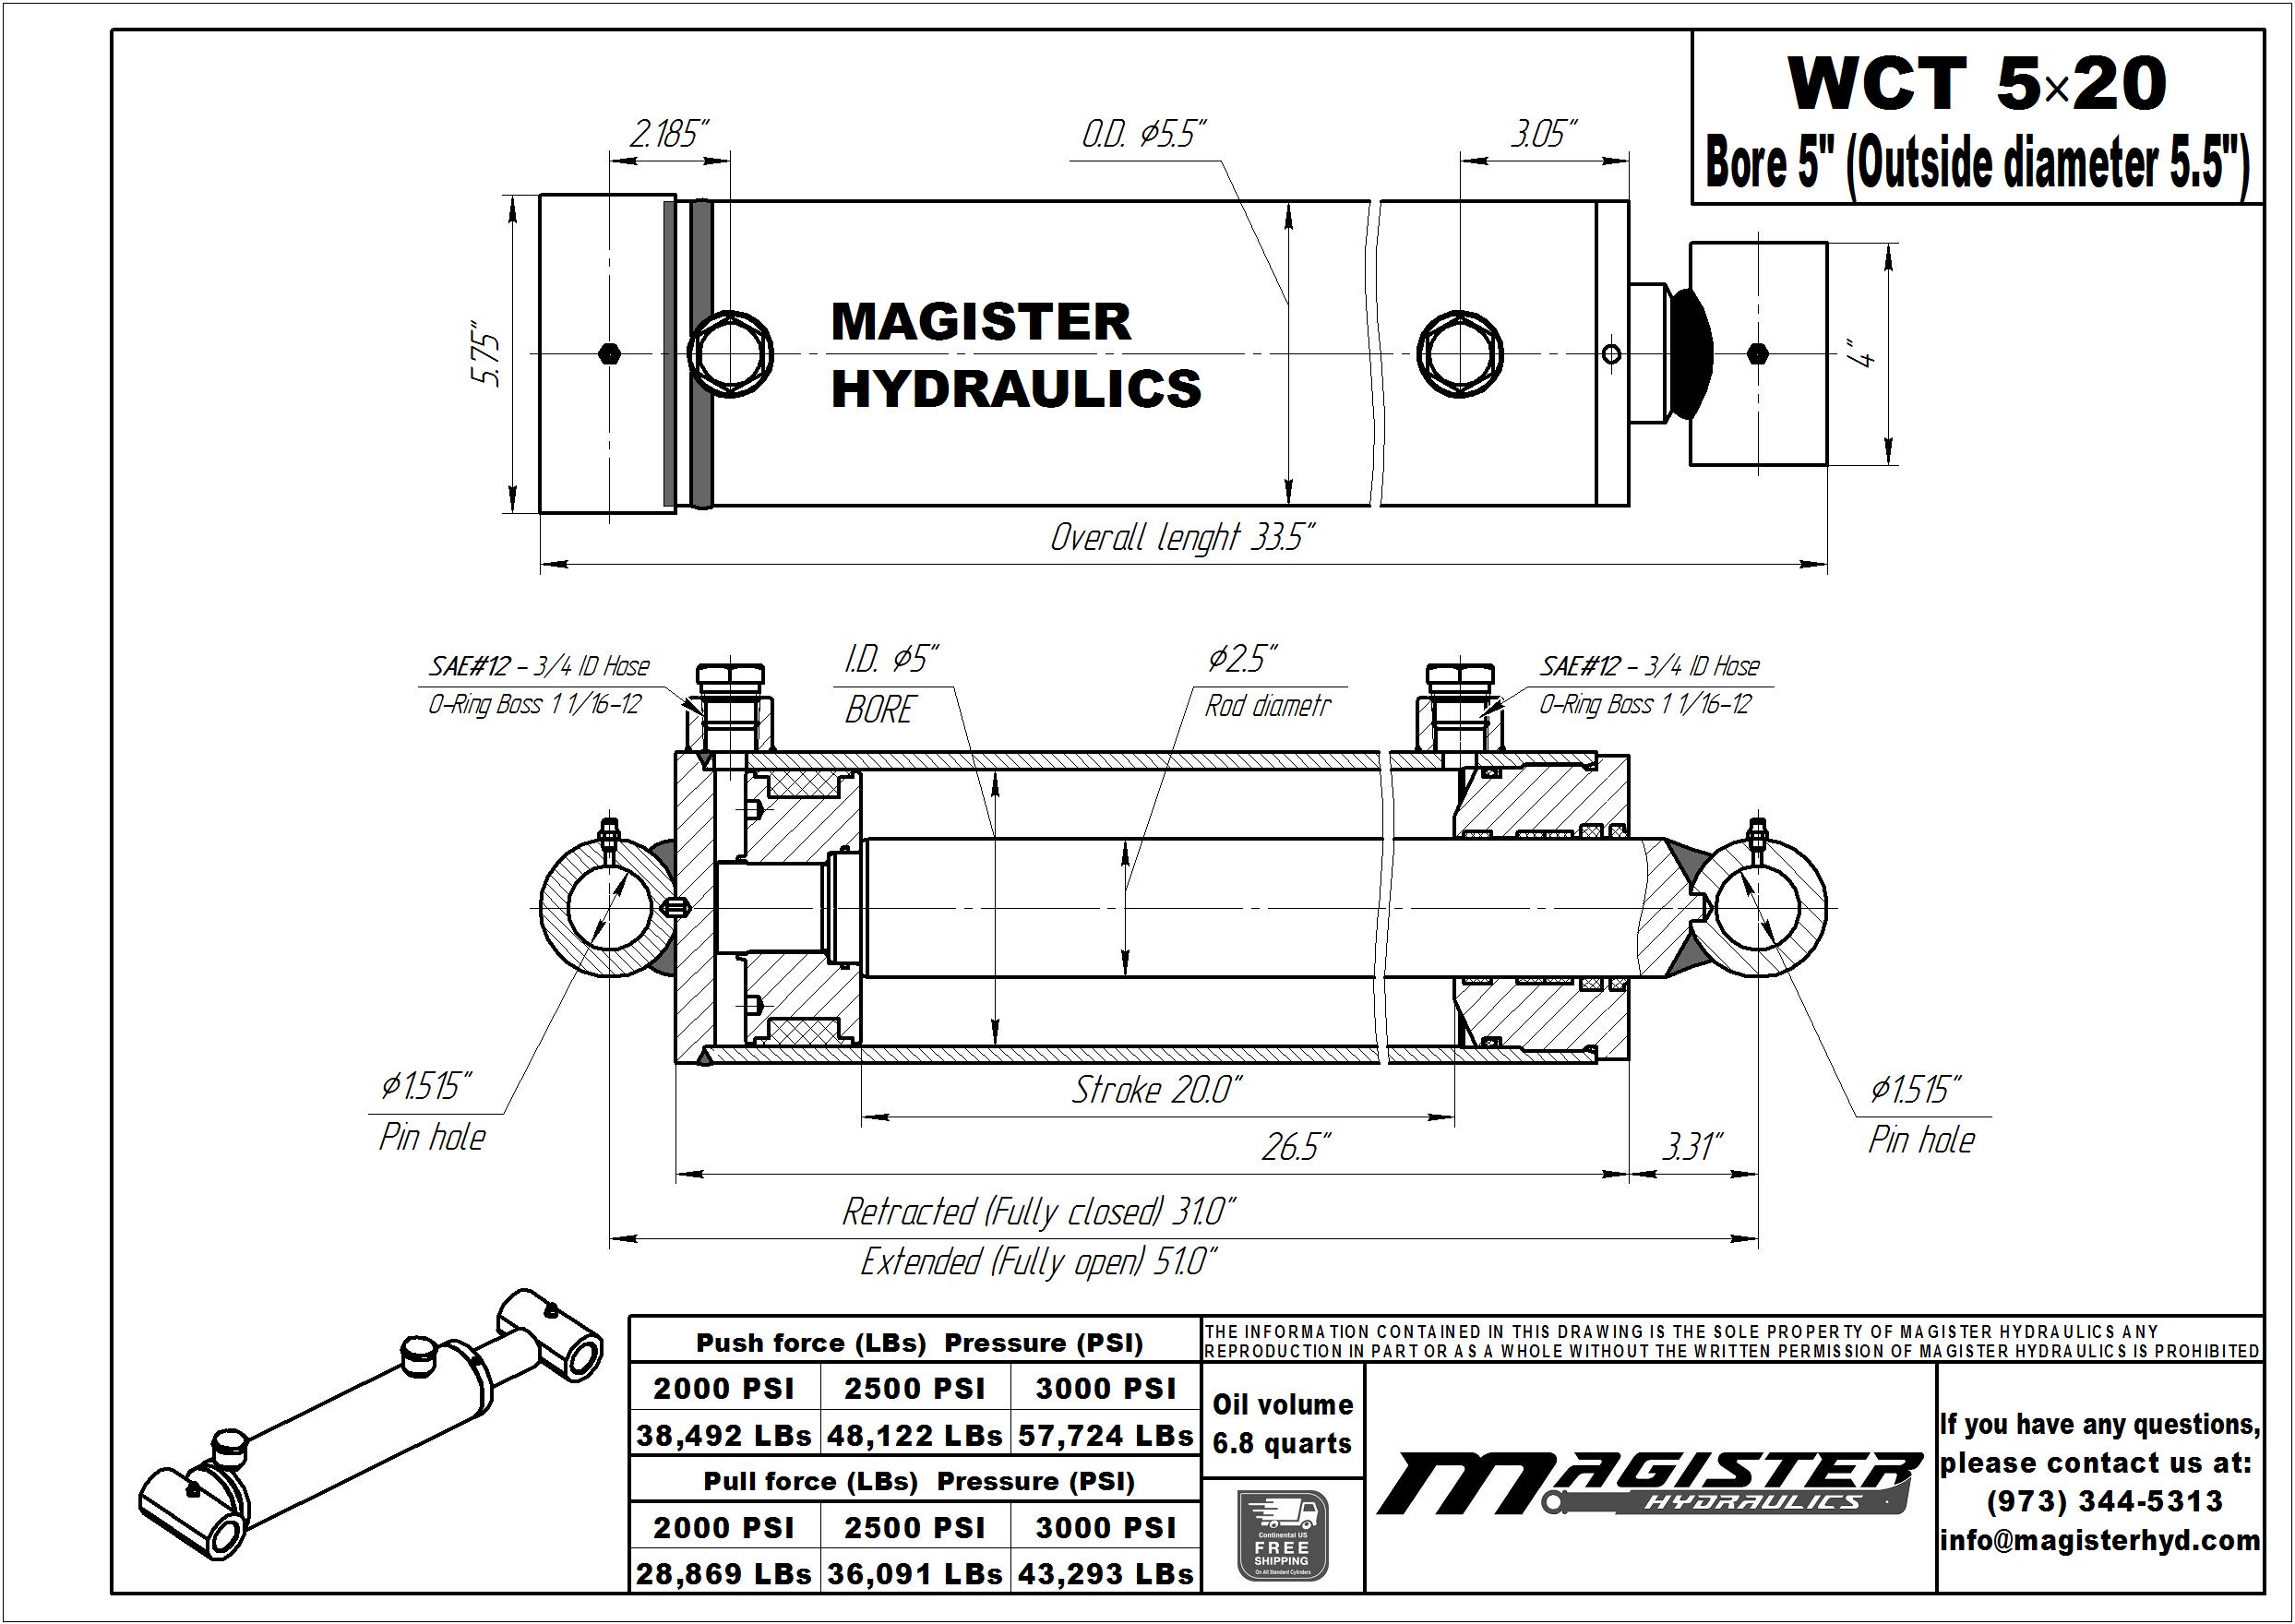 5 bore x 20 stroke hydraulic cylinder, welded cross tube double acting cylinder | Magister Hydraulics